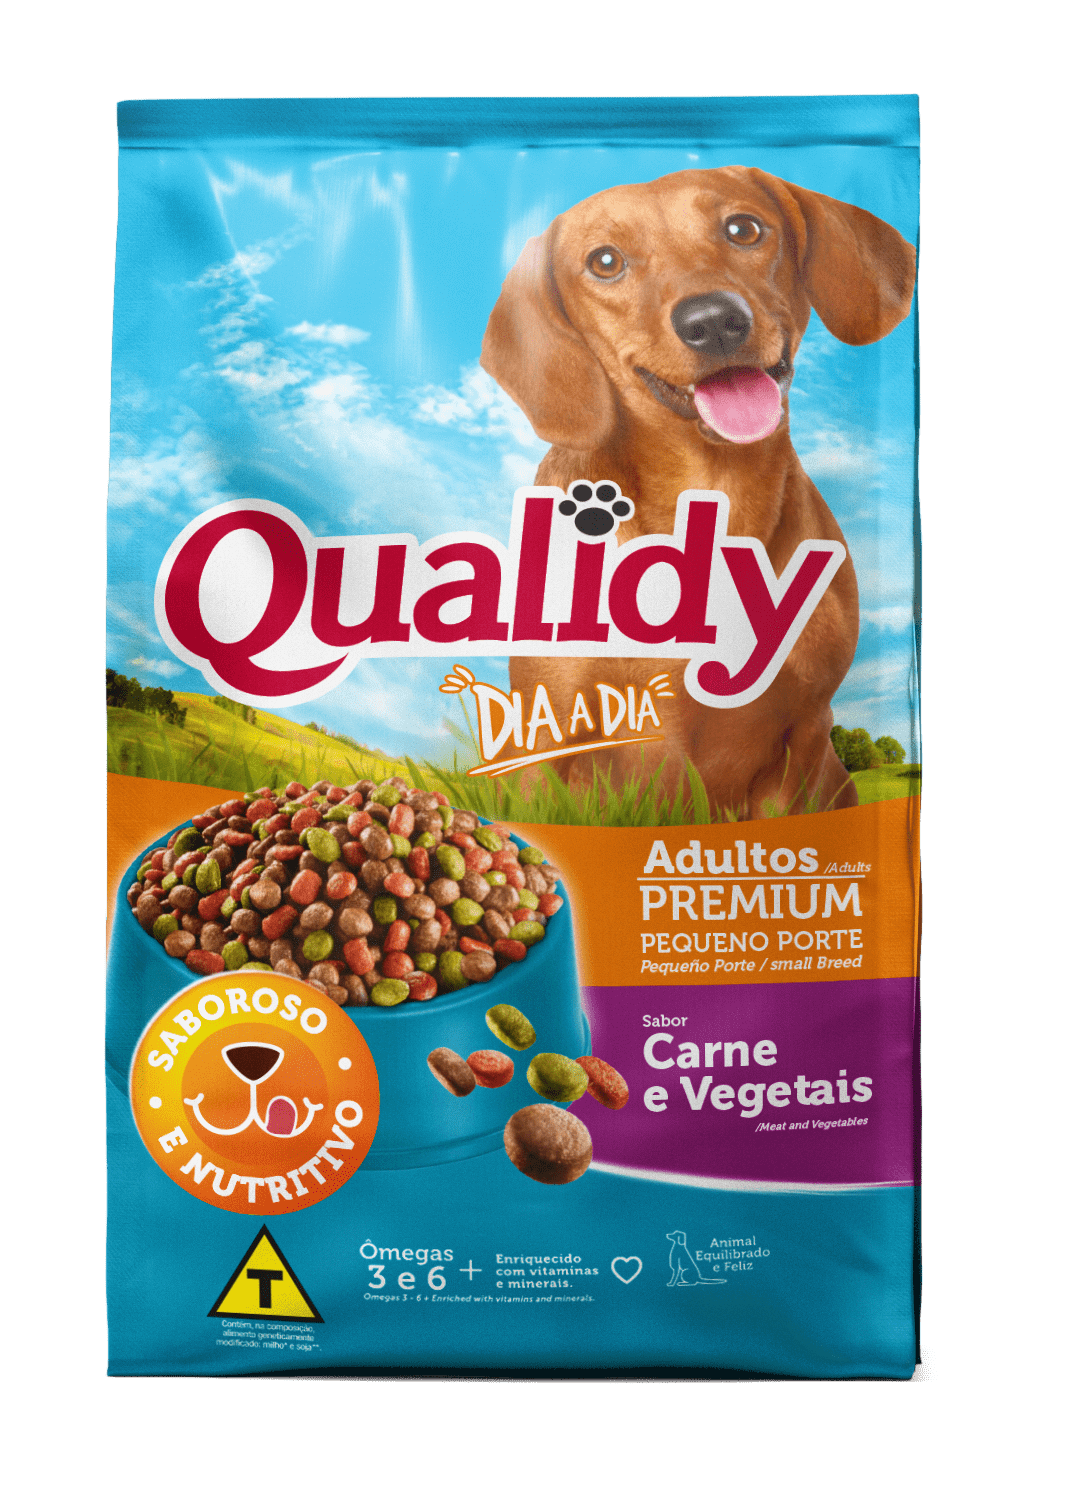 Qualidy Dia a Dia Adult Dogs Small Breed Beef and Vegetables flavor